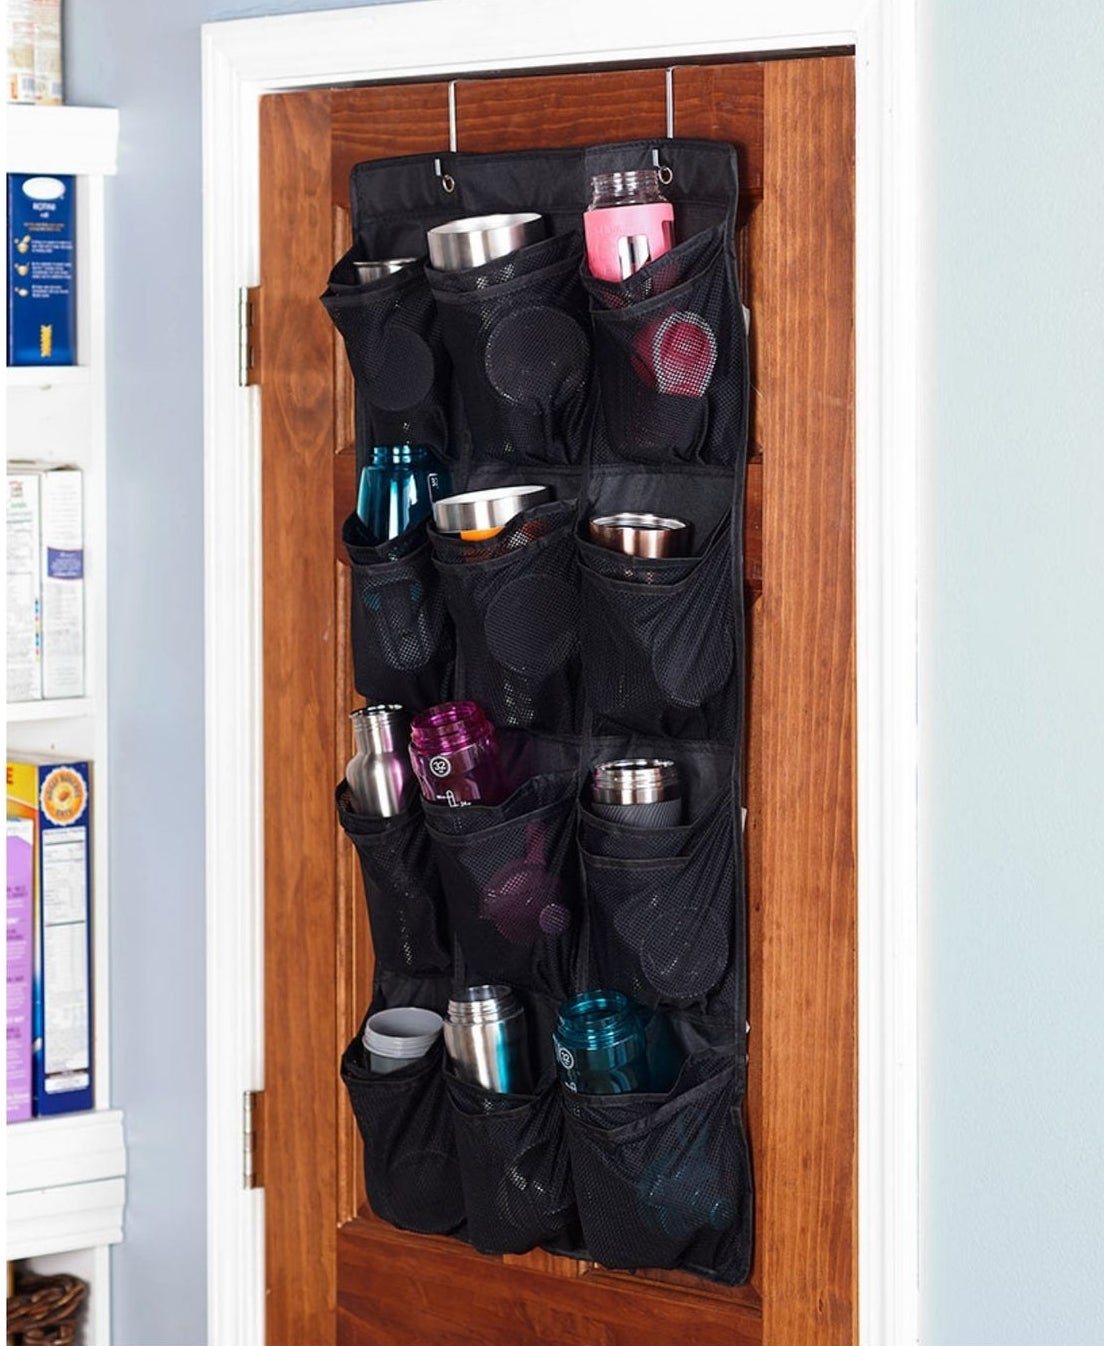 The water bottle organizer hanging on a pantry door